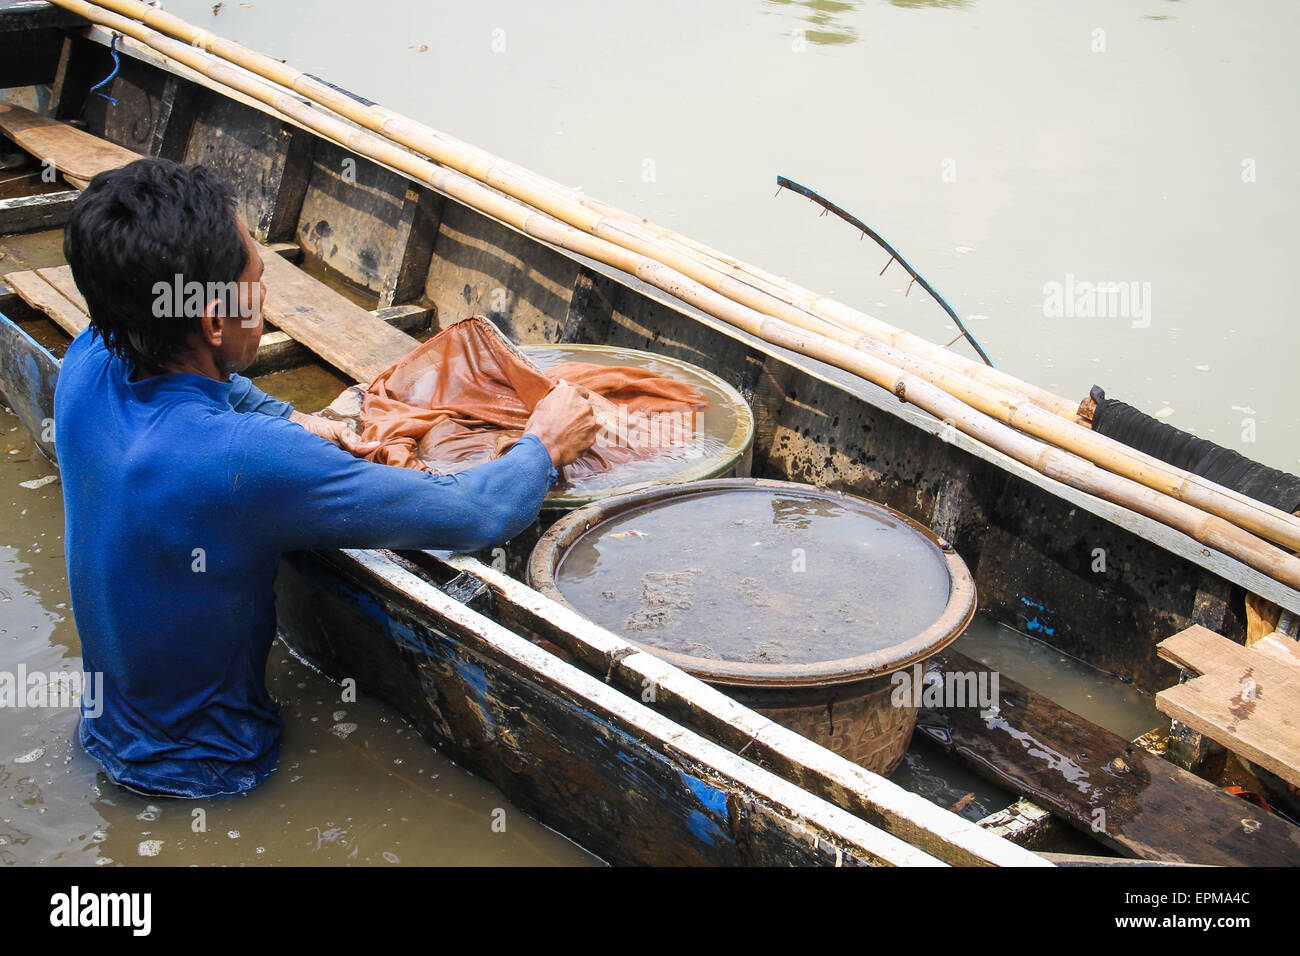 Tangerang, Indonesia. 18th July, 2014. Dodi (38 years old), who works as a Silkworm seekers (Tubifex), is looking for silk worms at Cisadane River, Tanah Gocap, Tangerang. Dodi day can get 25-30 cans per tin silk worms for 5 thousand and sold in fish stores in Tangerang. © Garry Andrew Lotulung/Pacific Press/Alamy Live News Stock Photo